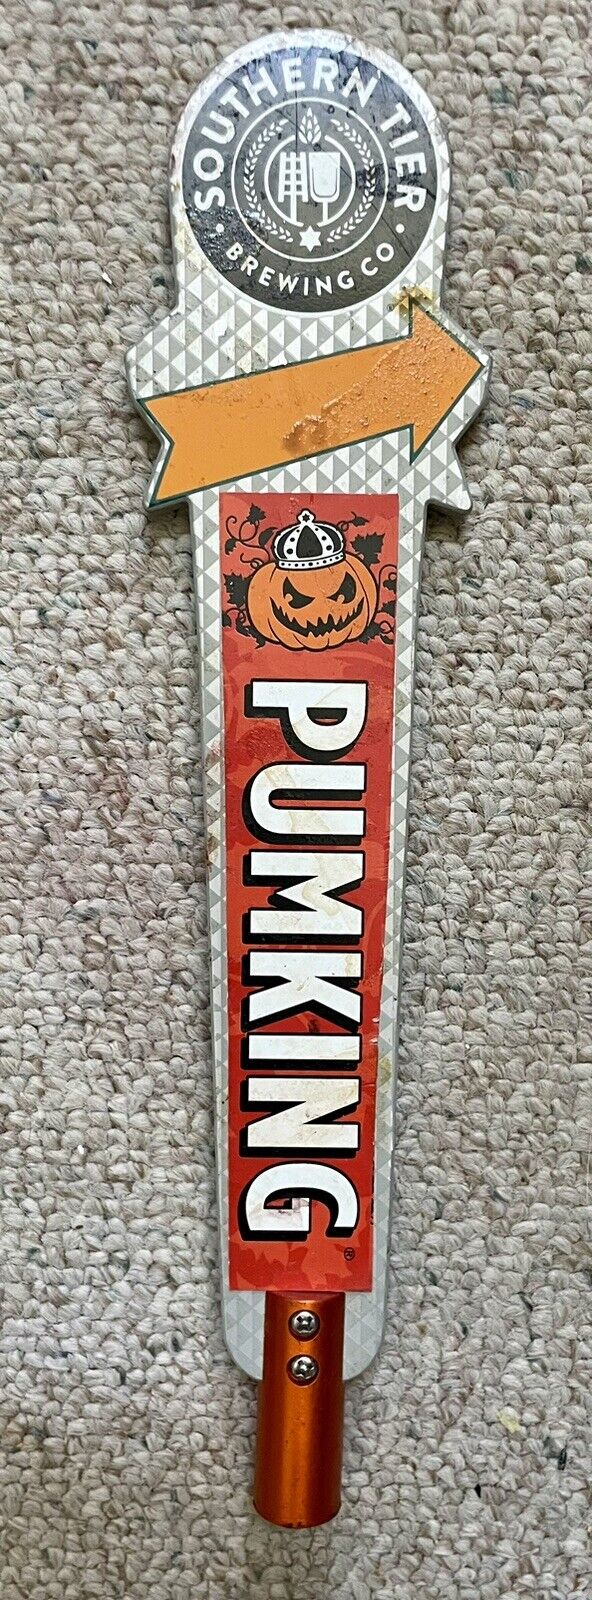 Southern Tier Brewing Co. Pumking tap handle